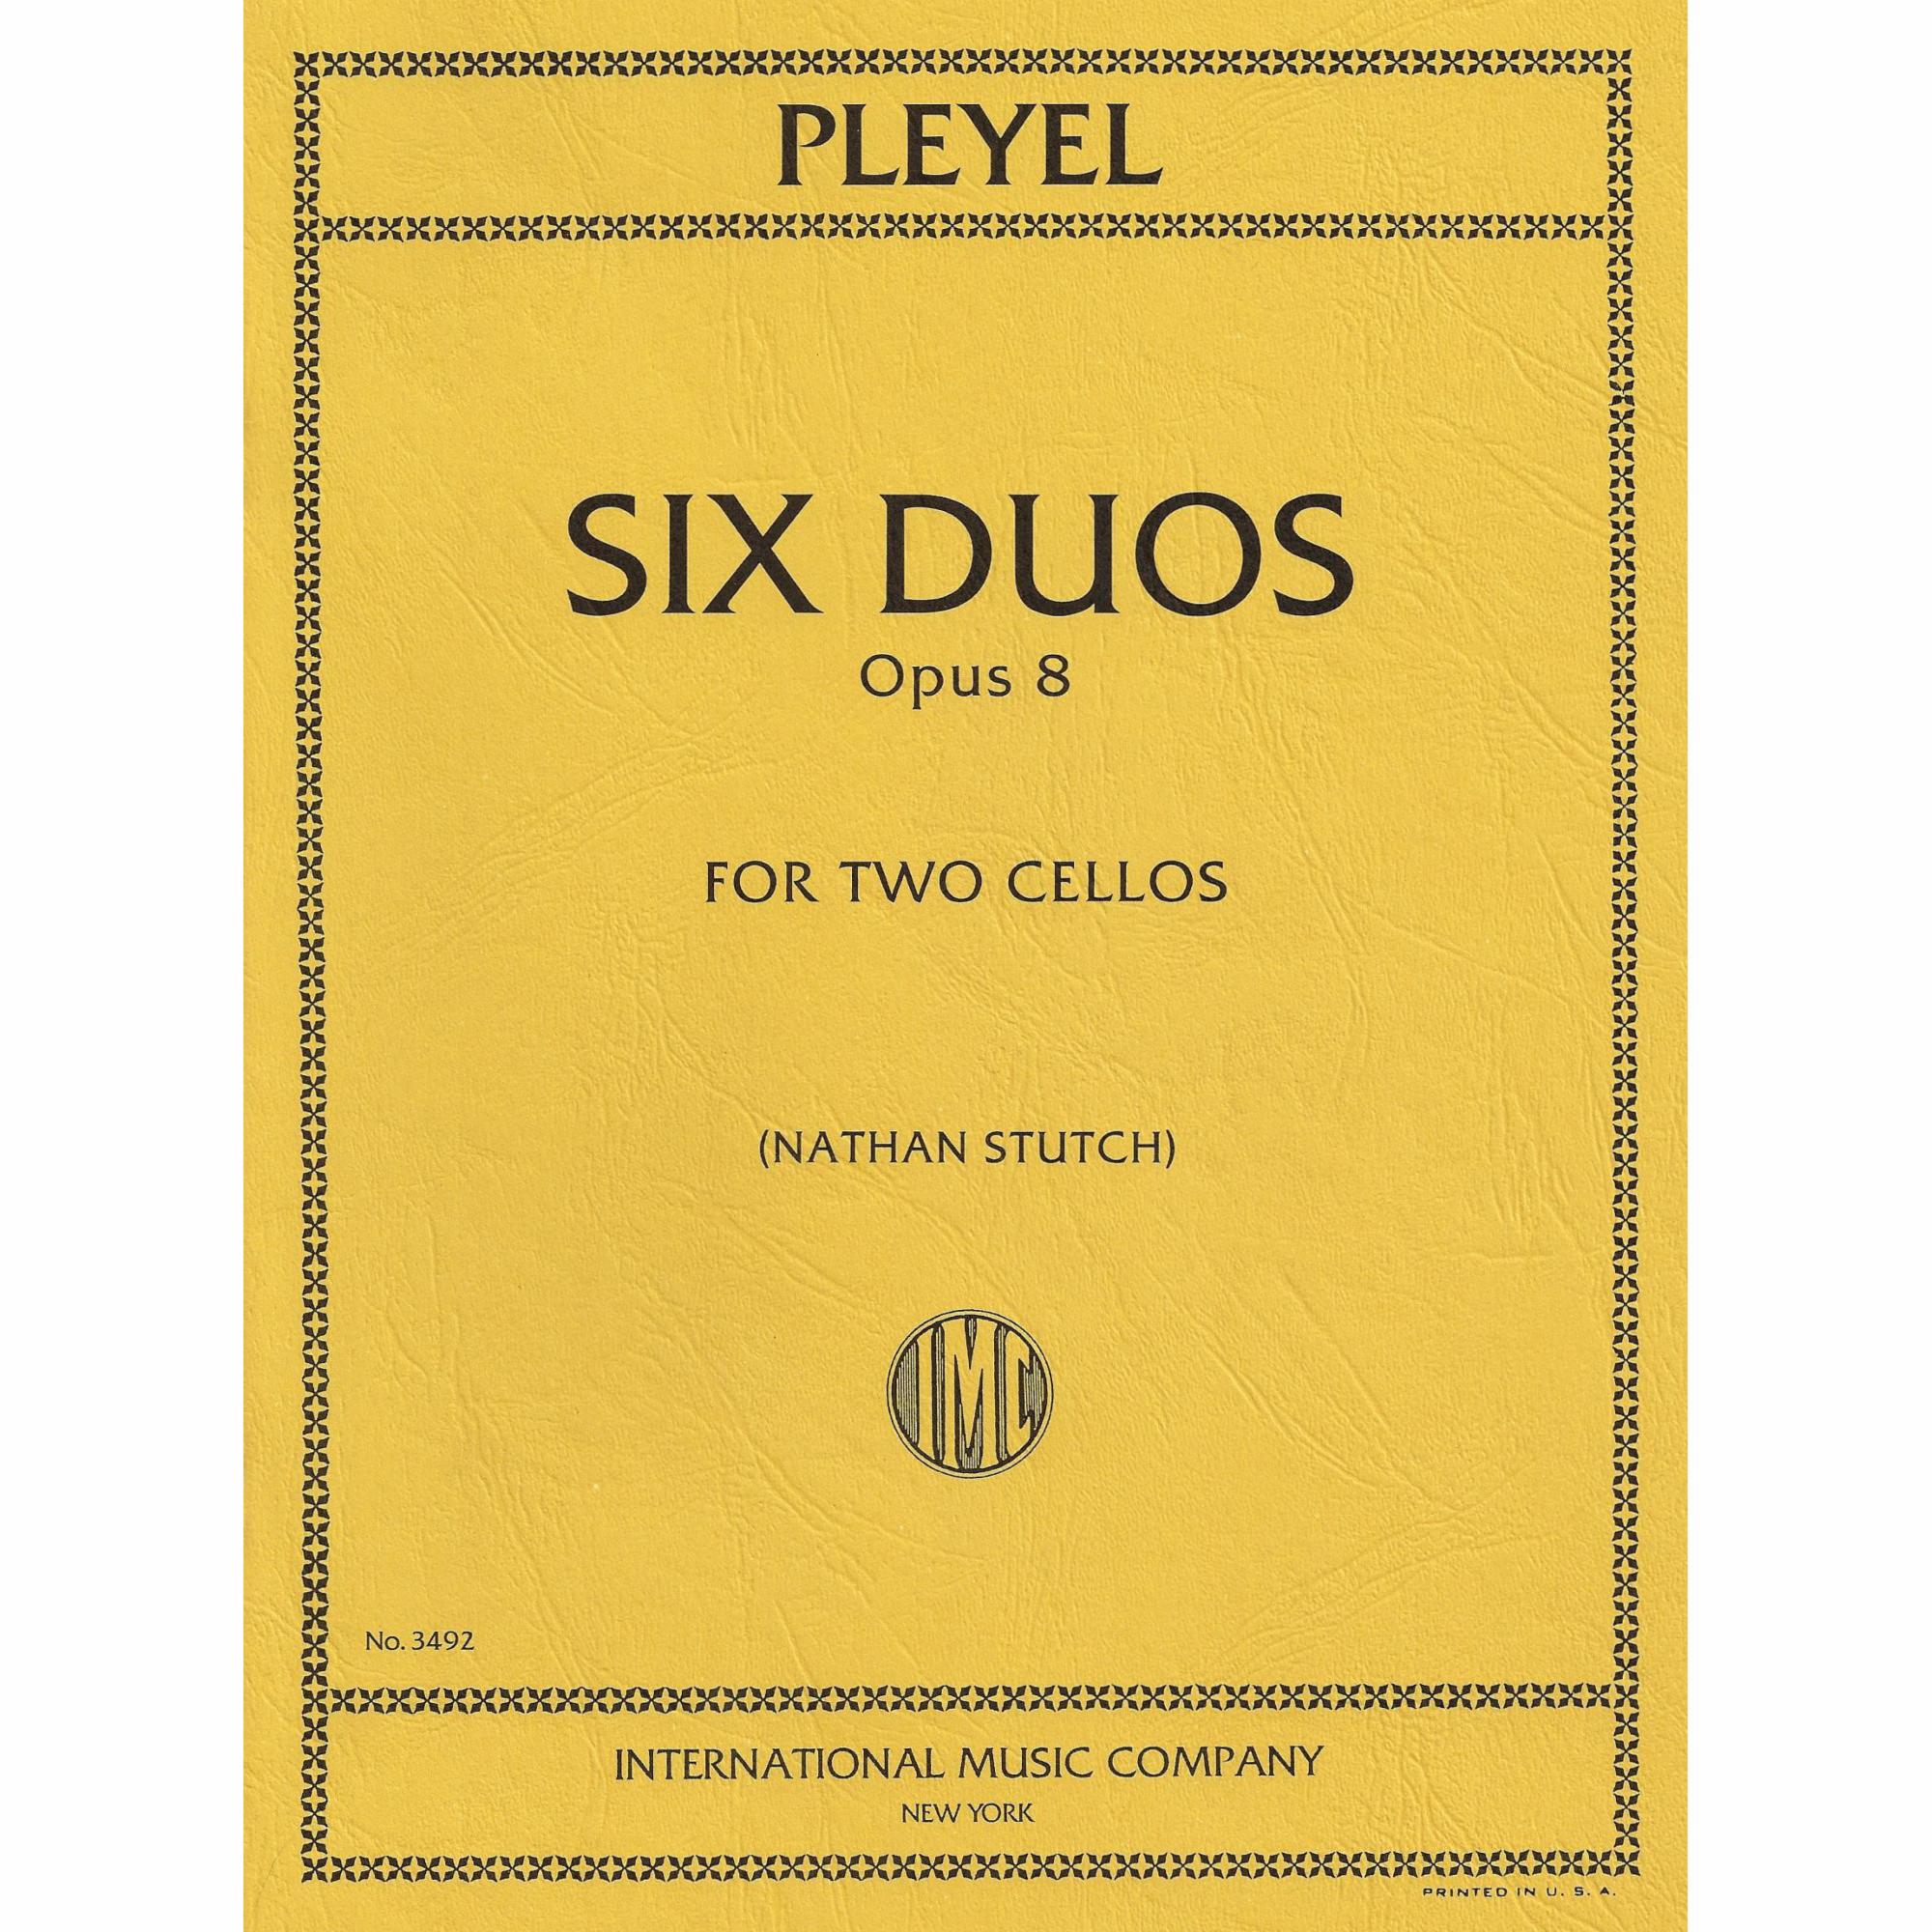 Pleyel -- Six Duos, Op. 8 for Two Cellos